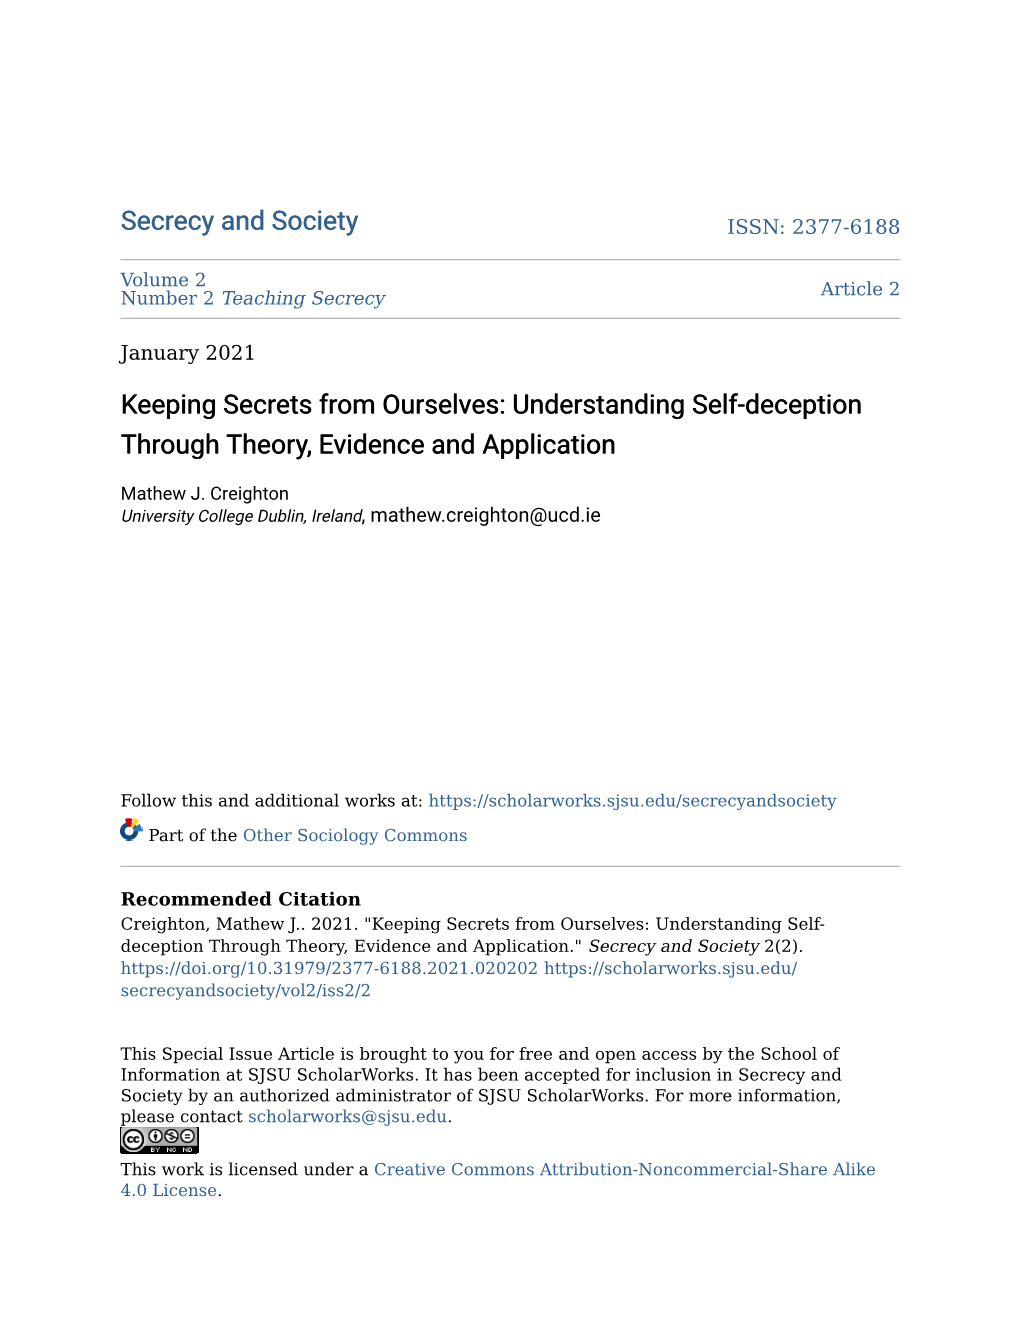 Understanding Self-Deception Through Theory, Evidence and Application